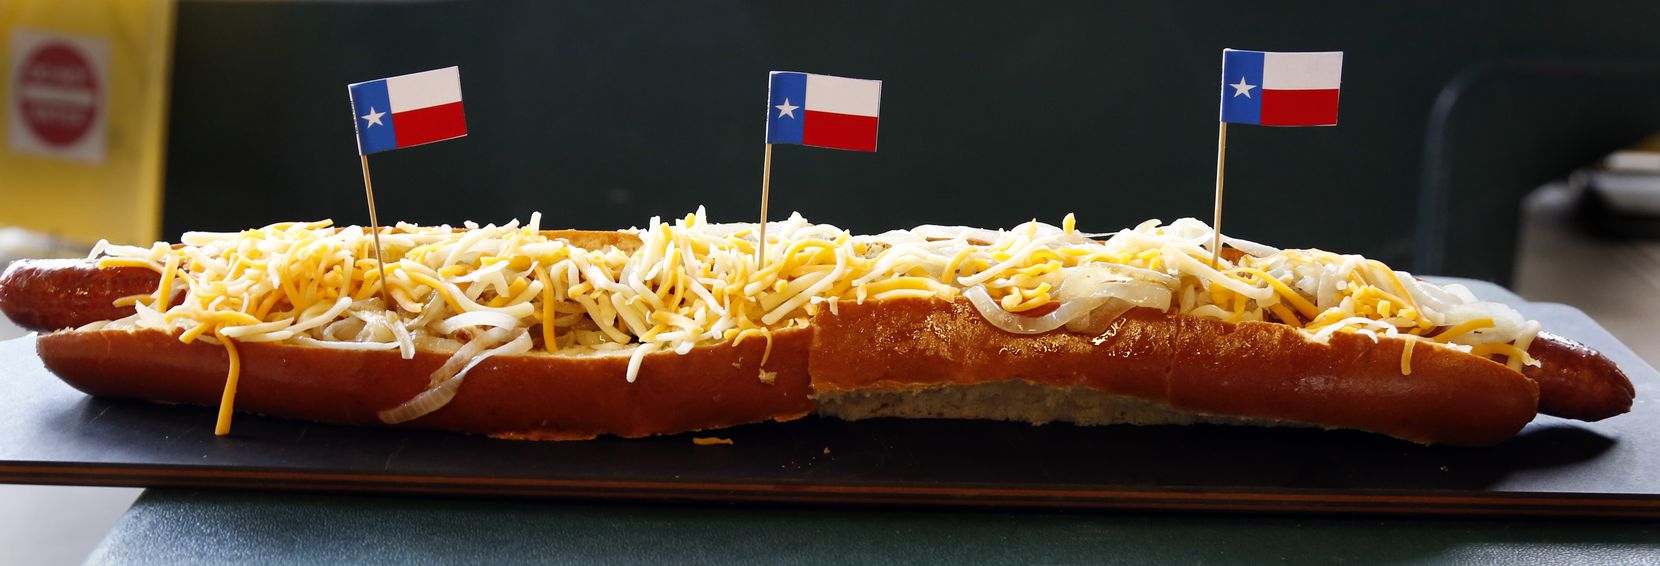 Cris Vázquez is the creator of the "boomstick," a 24-inch-long hot dog that debuted in 2012.